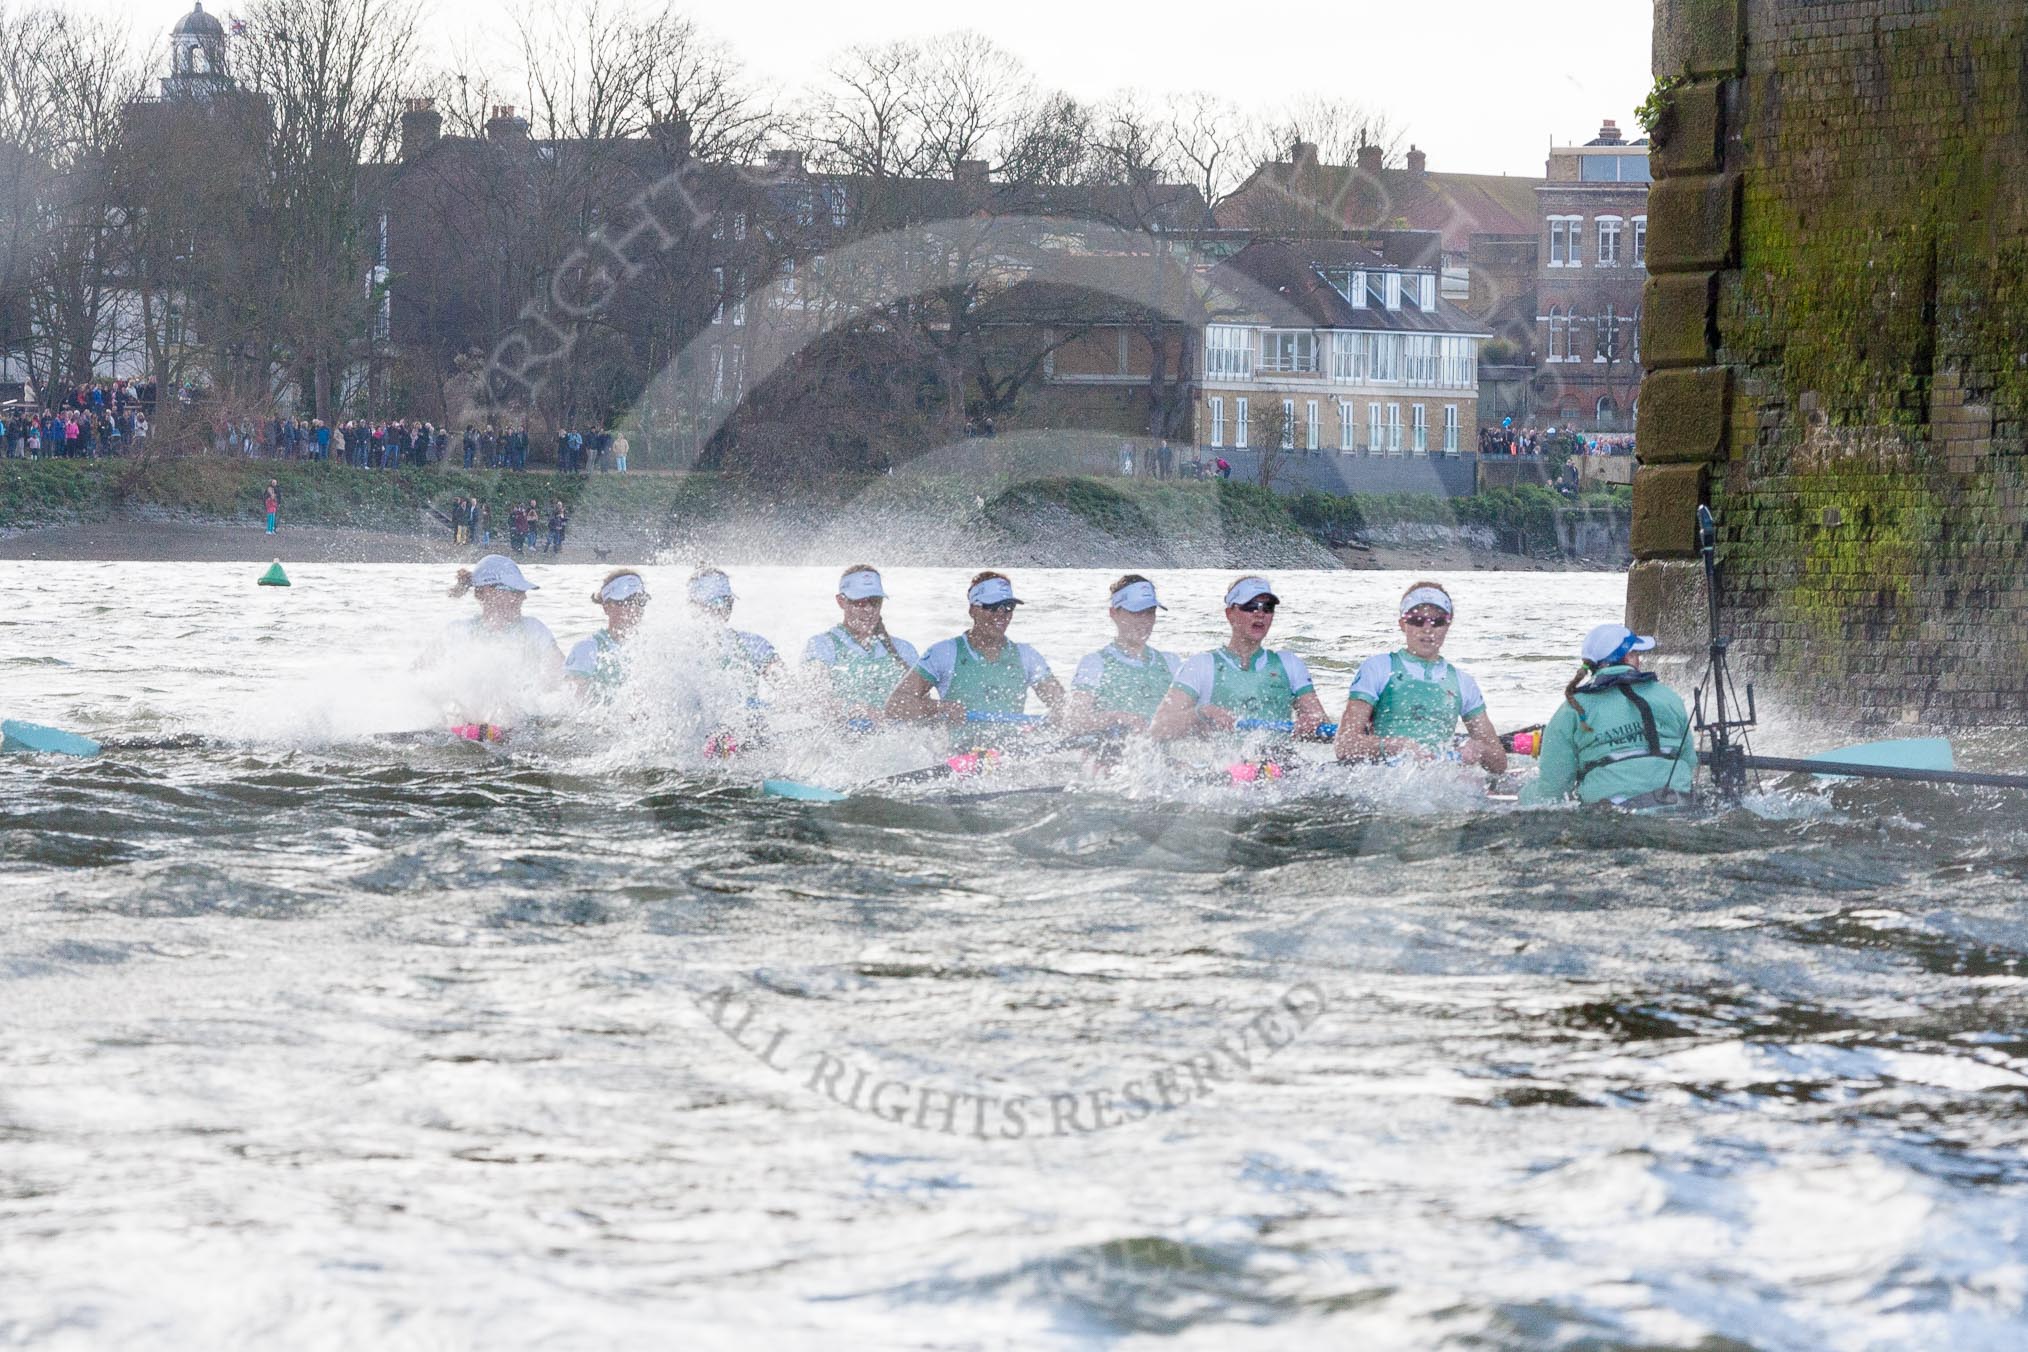 The Boat Race season 2016 -  The Cancer Research Women's Boat Race.
River Thames between Putney Bridge and Mortlake,
London SW15,

United Kingdom,
on 27 March 2016 at 14:29, image #299